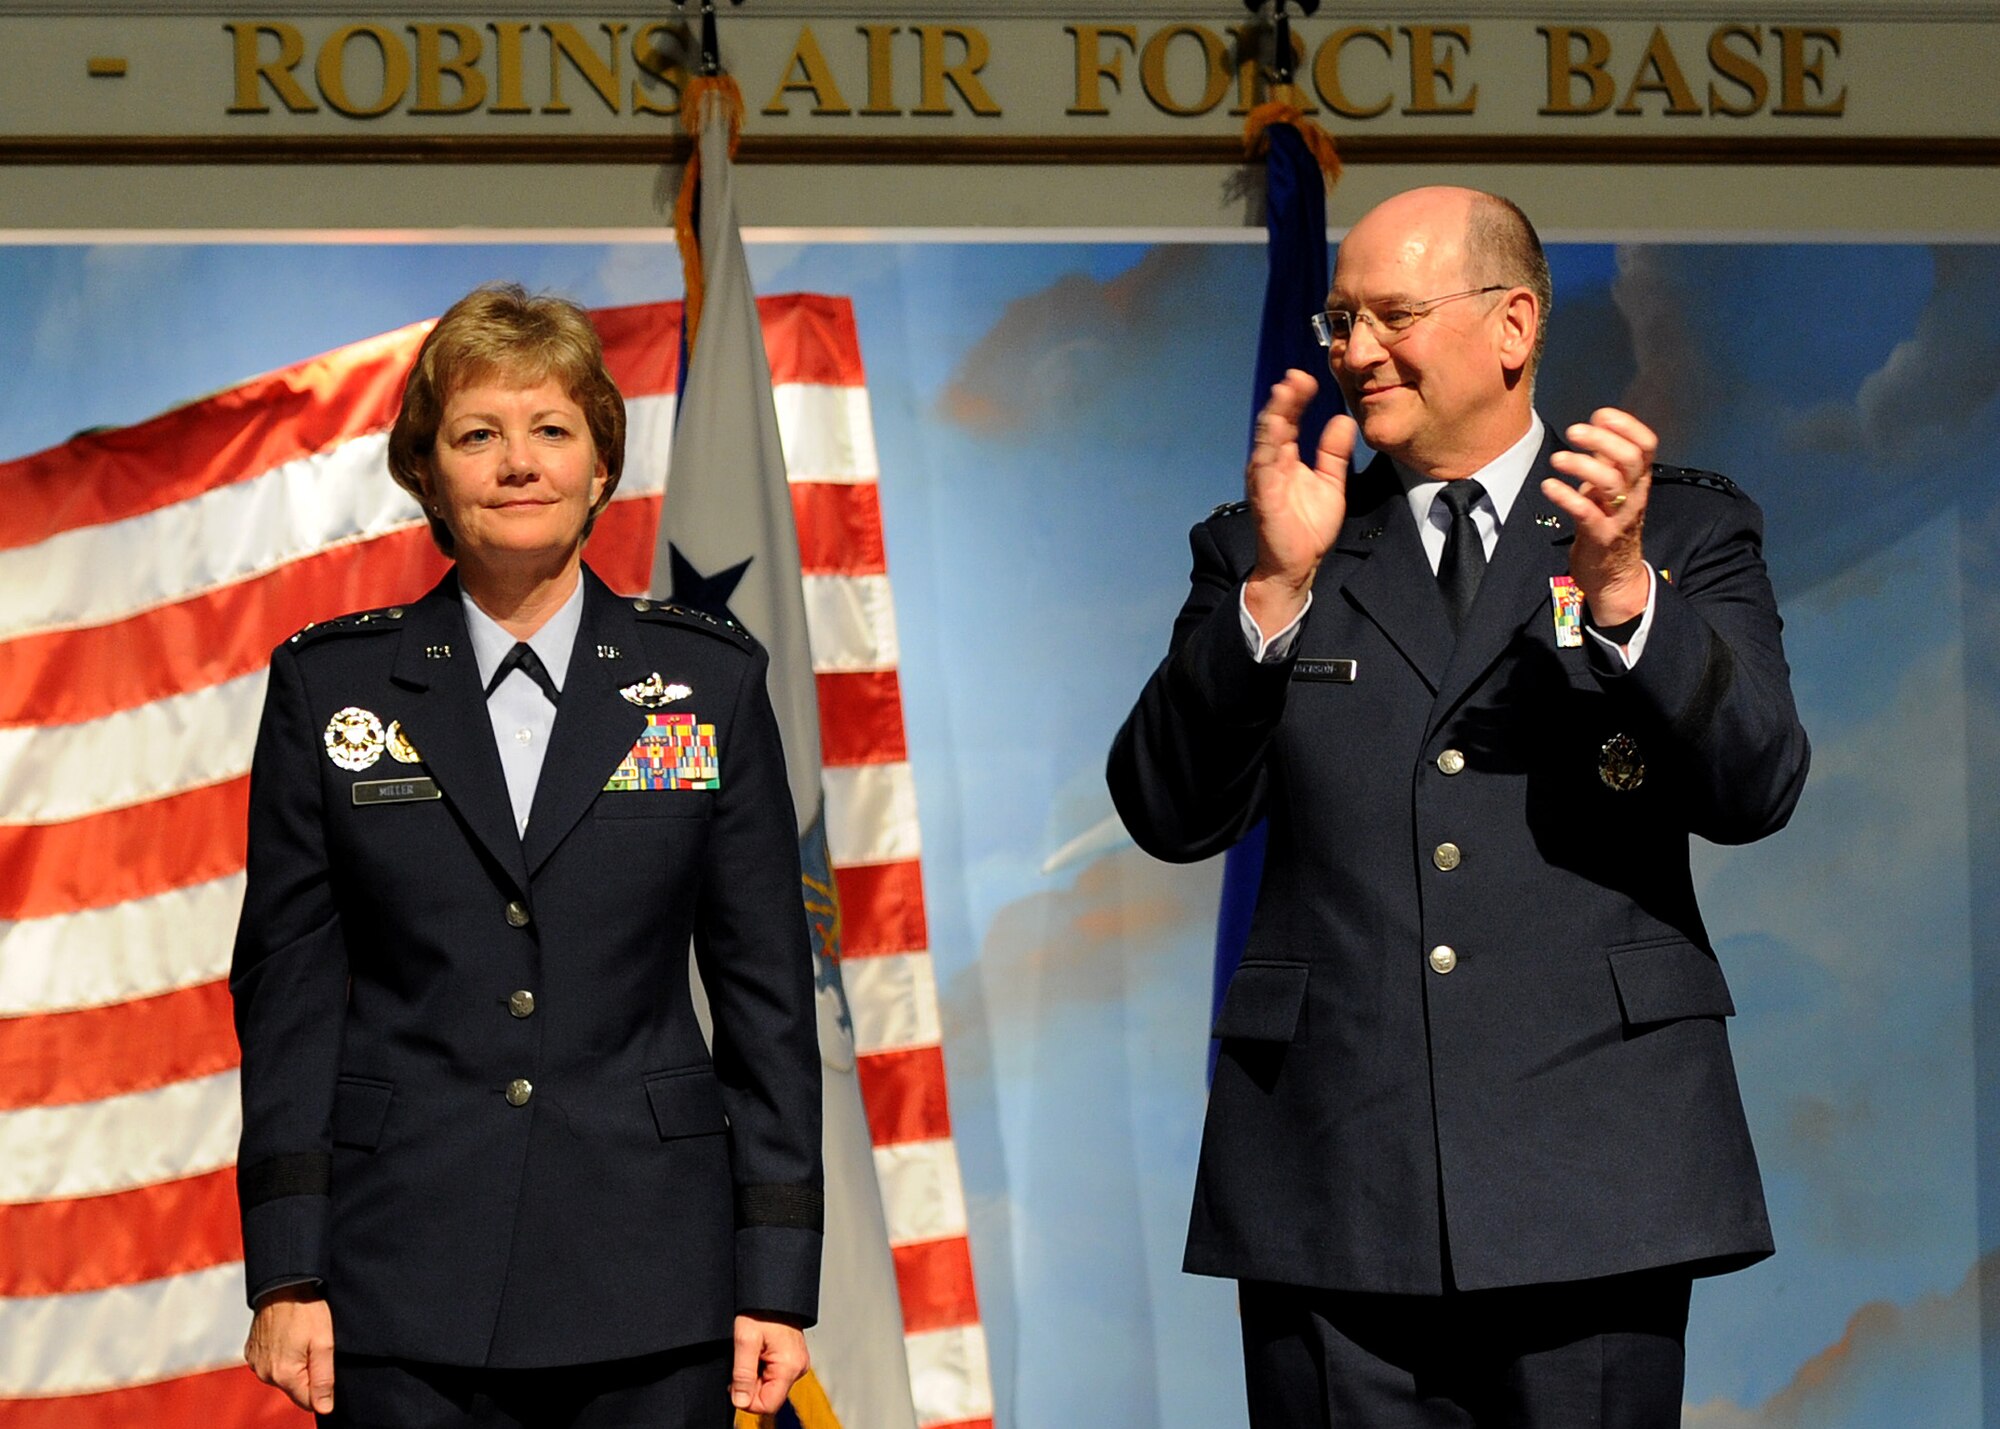 Newly appointed commander of Air Force Reserve Command, Lt. Gen. Maryanne Miller, stands next to the former commander of AFRC, Lt. Gen. James F. Jackson, as he congratulates her on the new position during the change of command ceremony at the Museum of Aviation in Warner Robins, Ga., July 15, 2016. Miller became the first female to assume command of AFRC. (U.S. Air Force photo by Tech. Sgt. Stephen D. Schester)